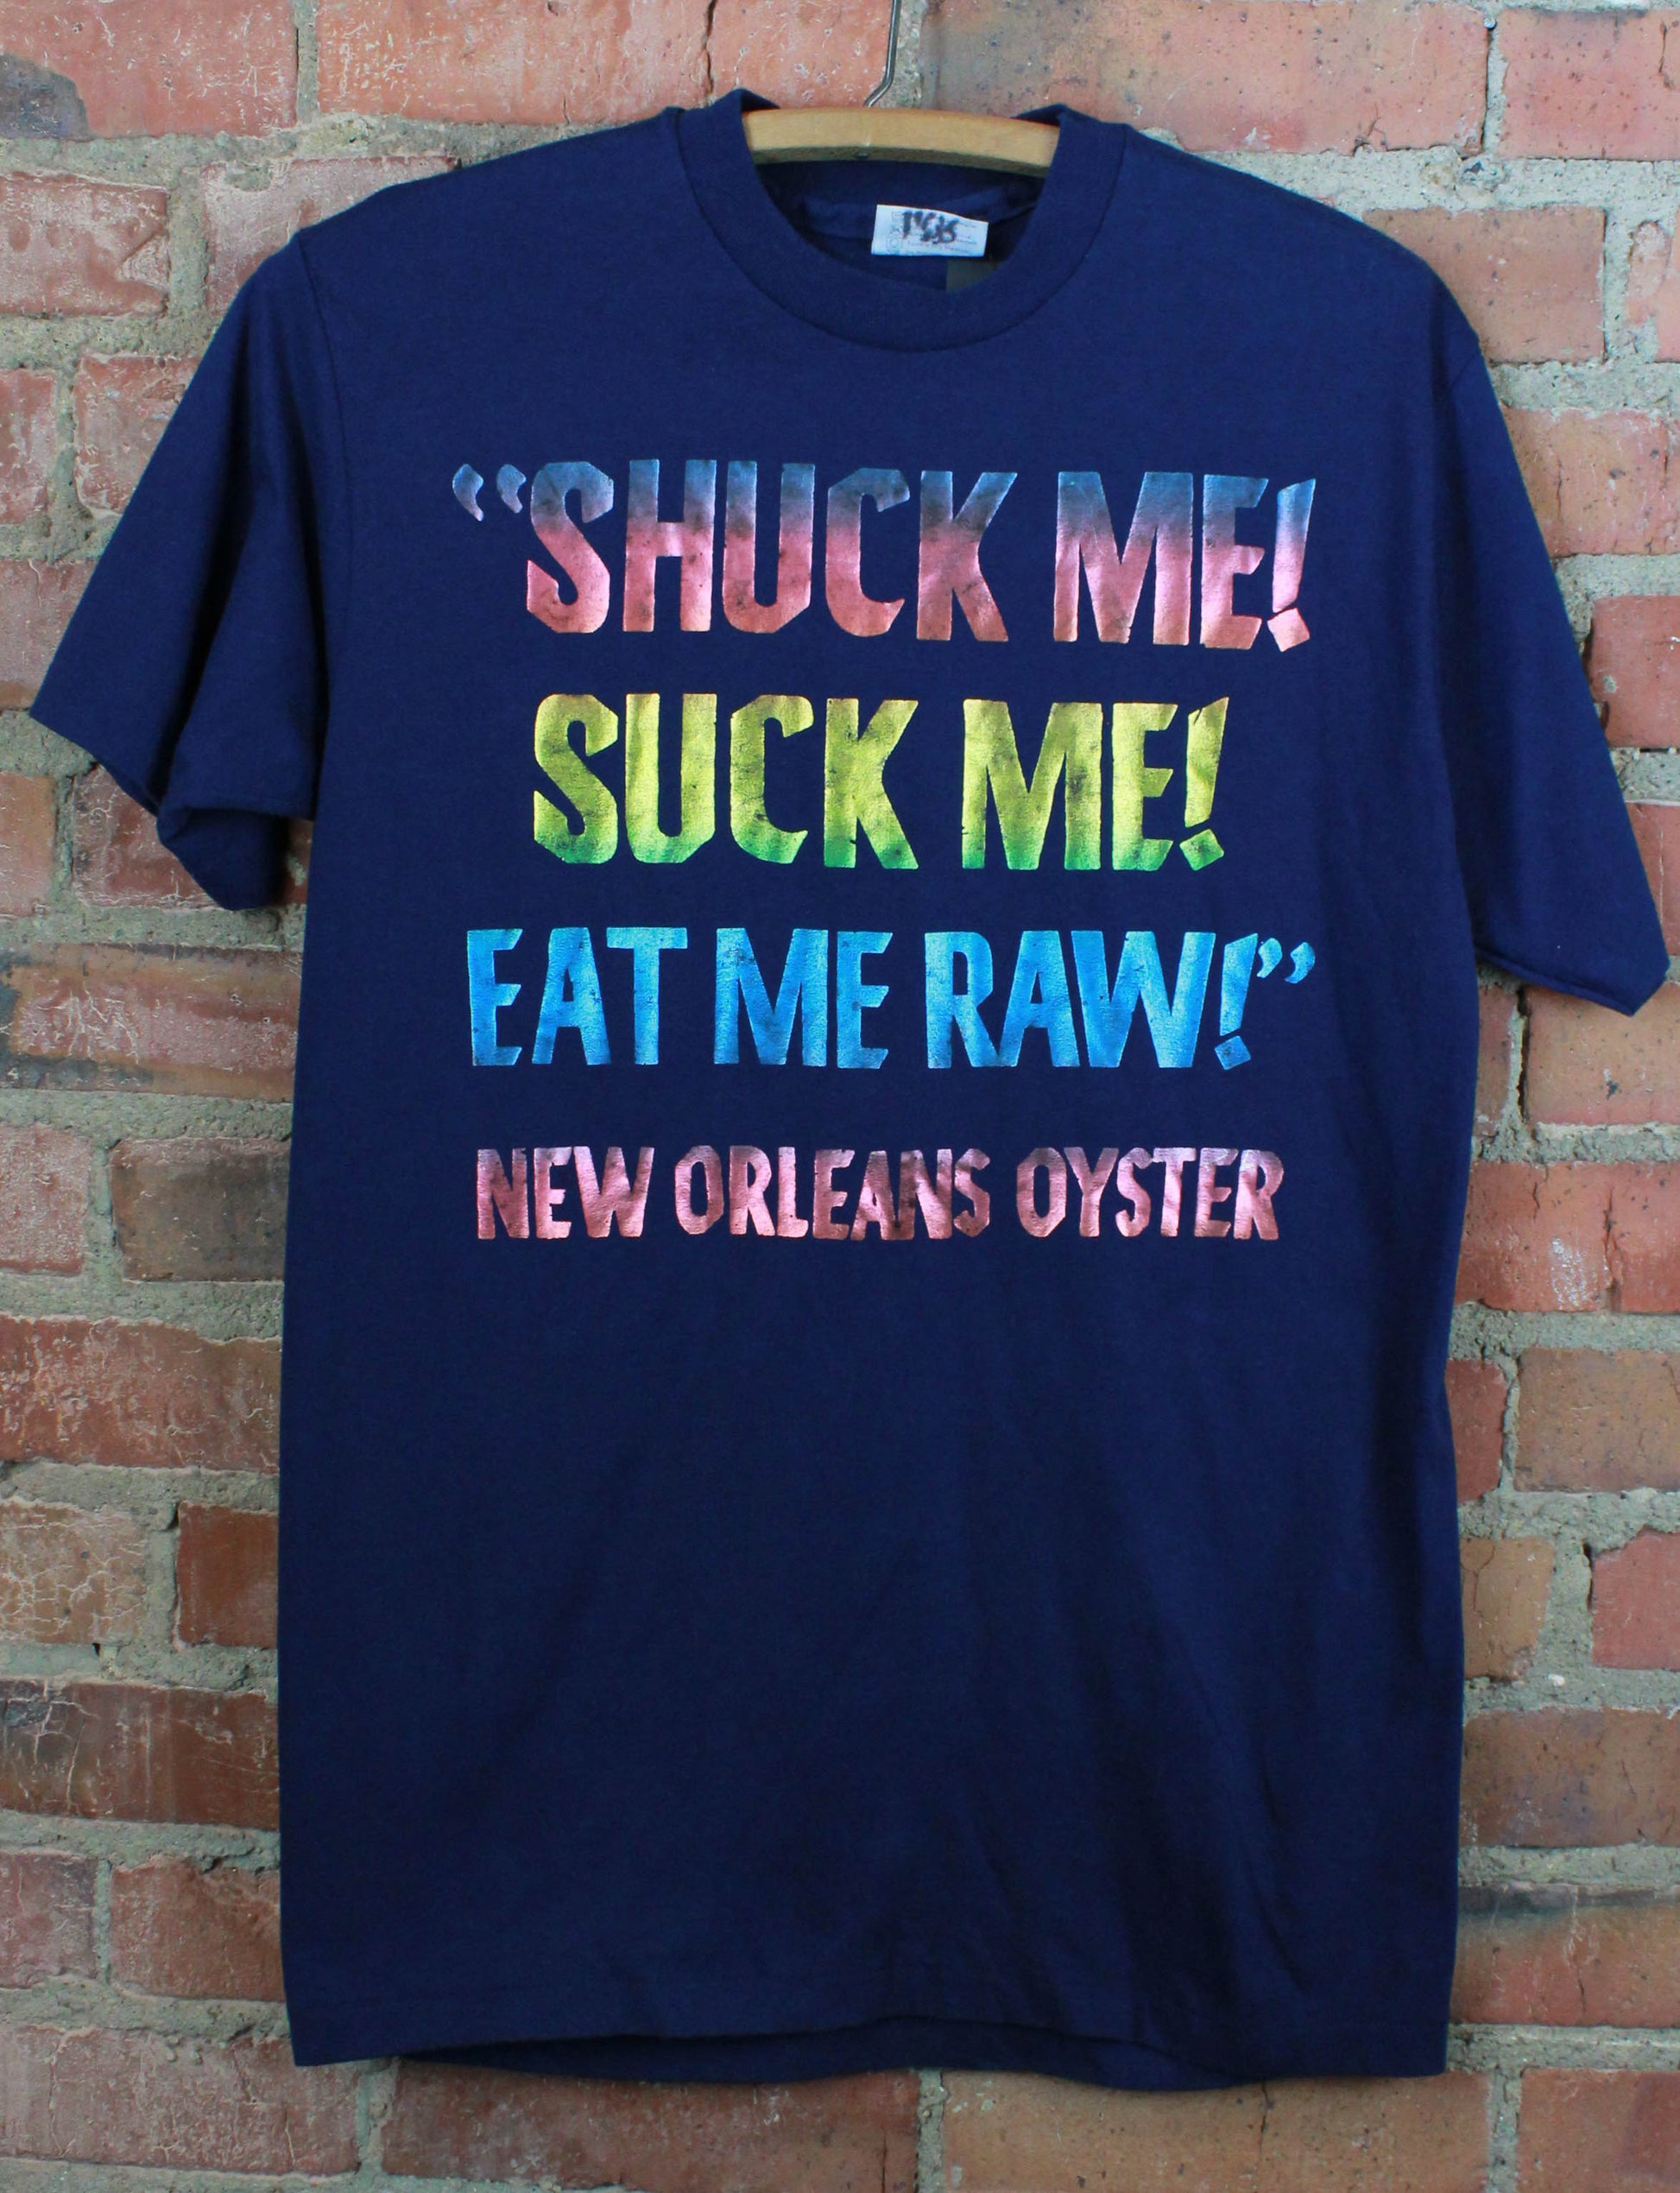 Vintage 80's New Orleans Oyster Graphic T Shirt Holographic Navy Blue Unisex Medium